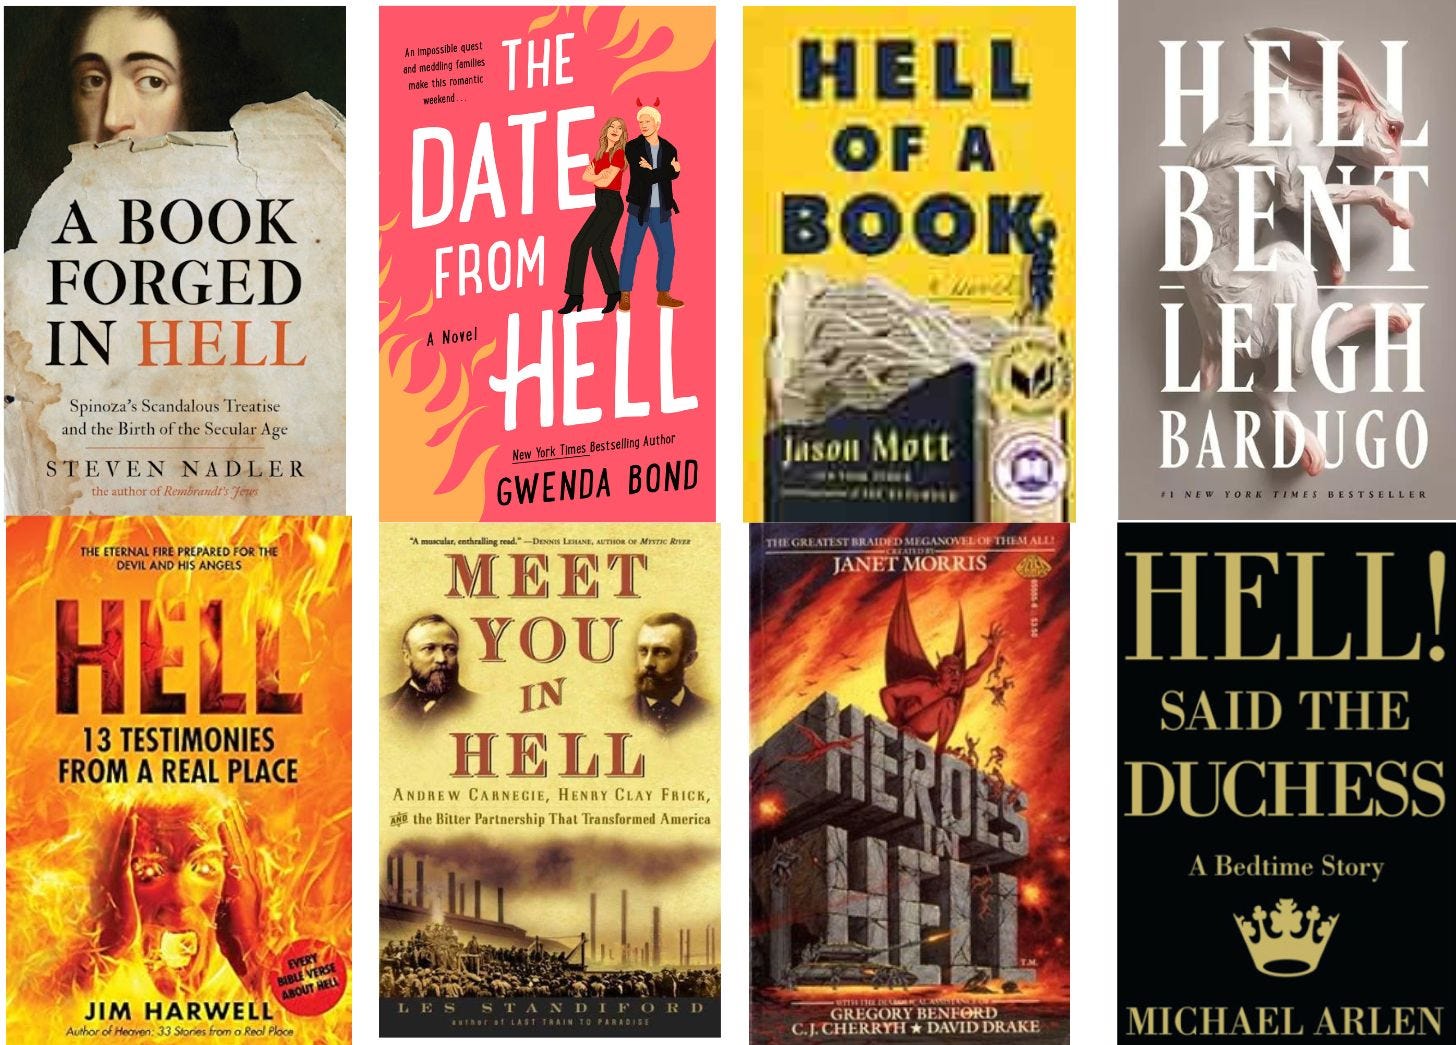 Covers of eight existing books with the word "Hell" in their title, including The Date from Hell, Hell Bent, and Hell of a Book.